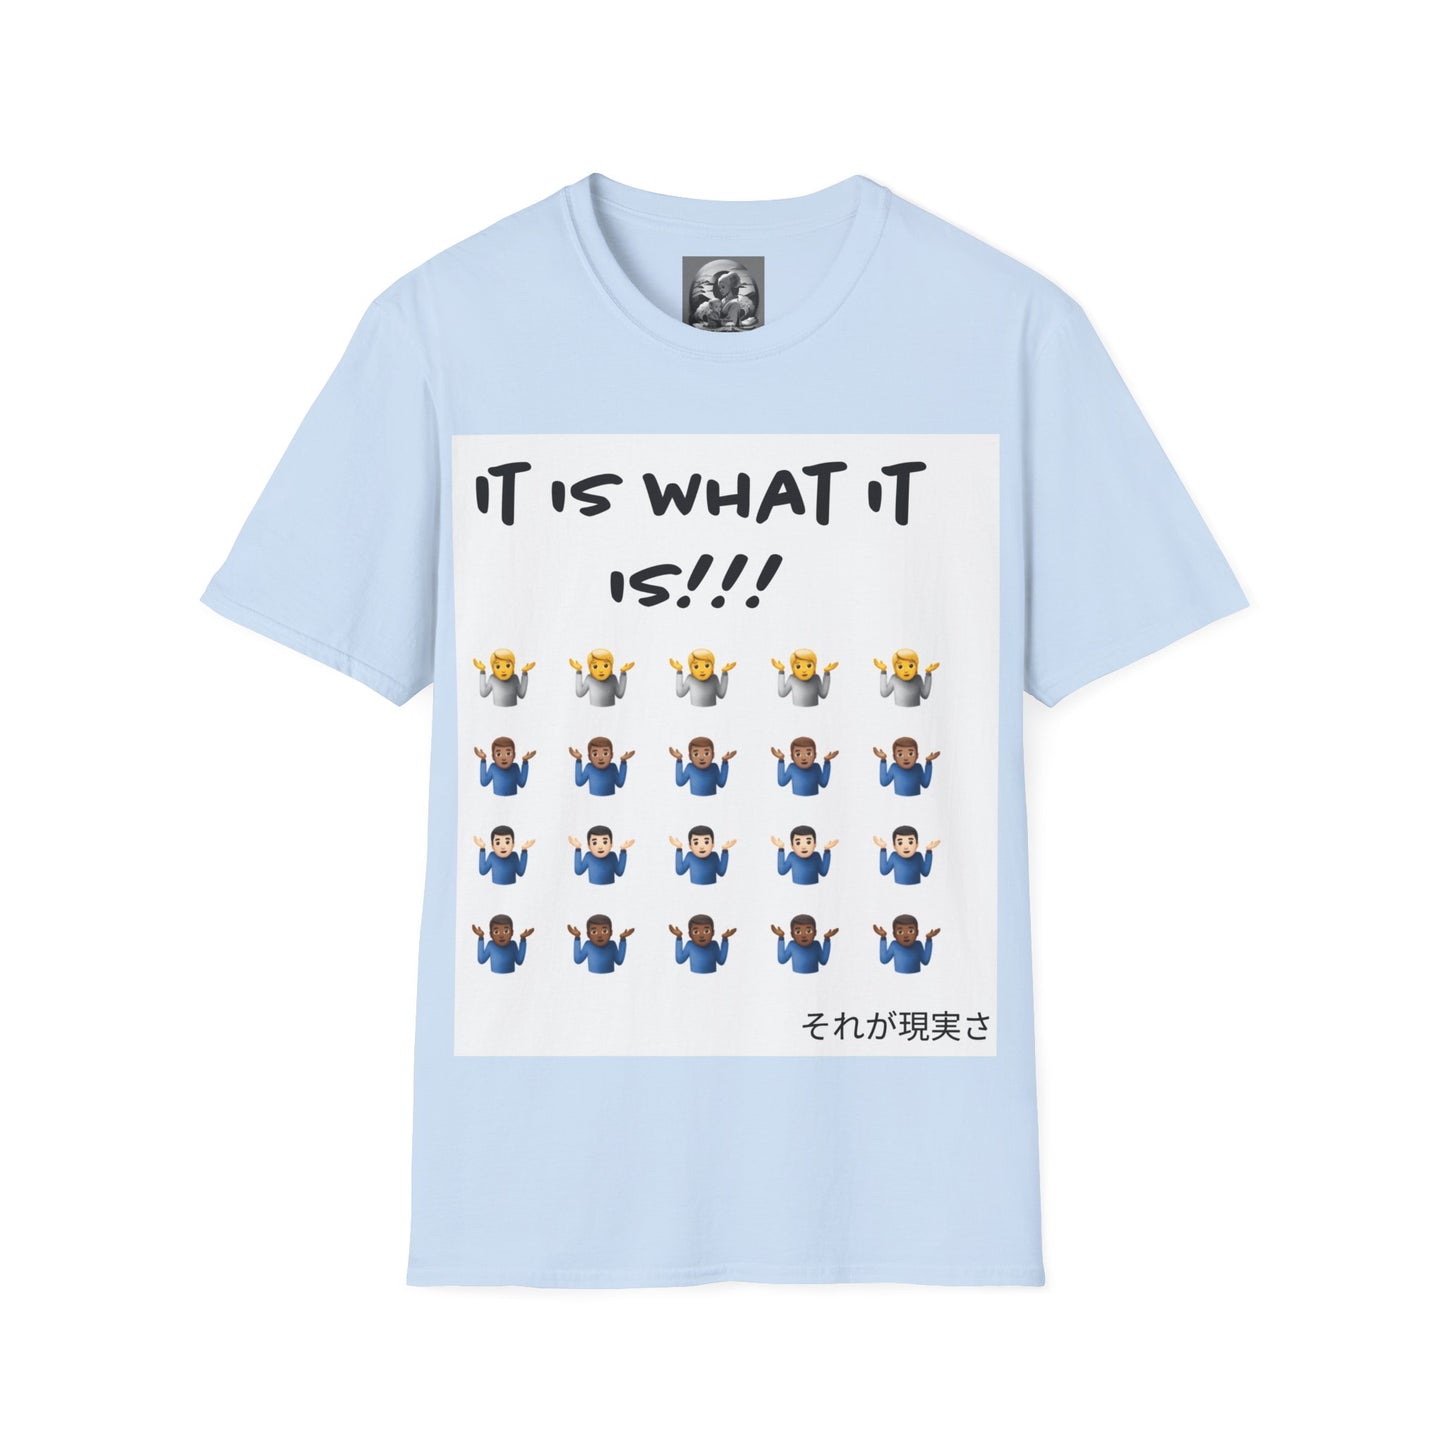 "It is what it is male" Single Print Unisex Softstyle T-Shirt